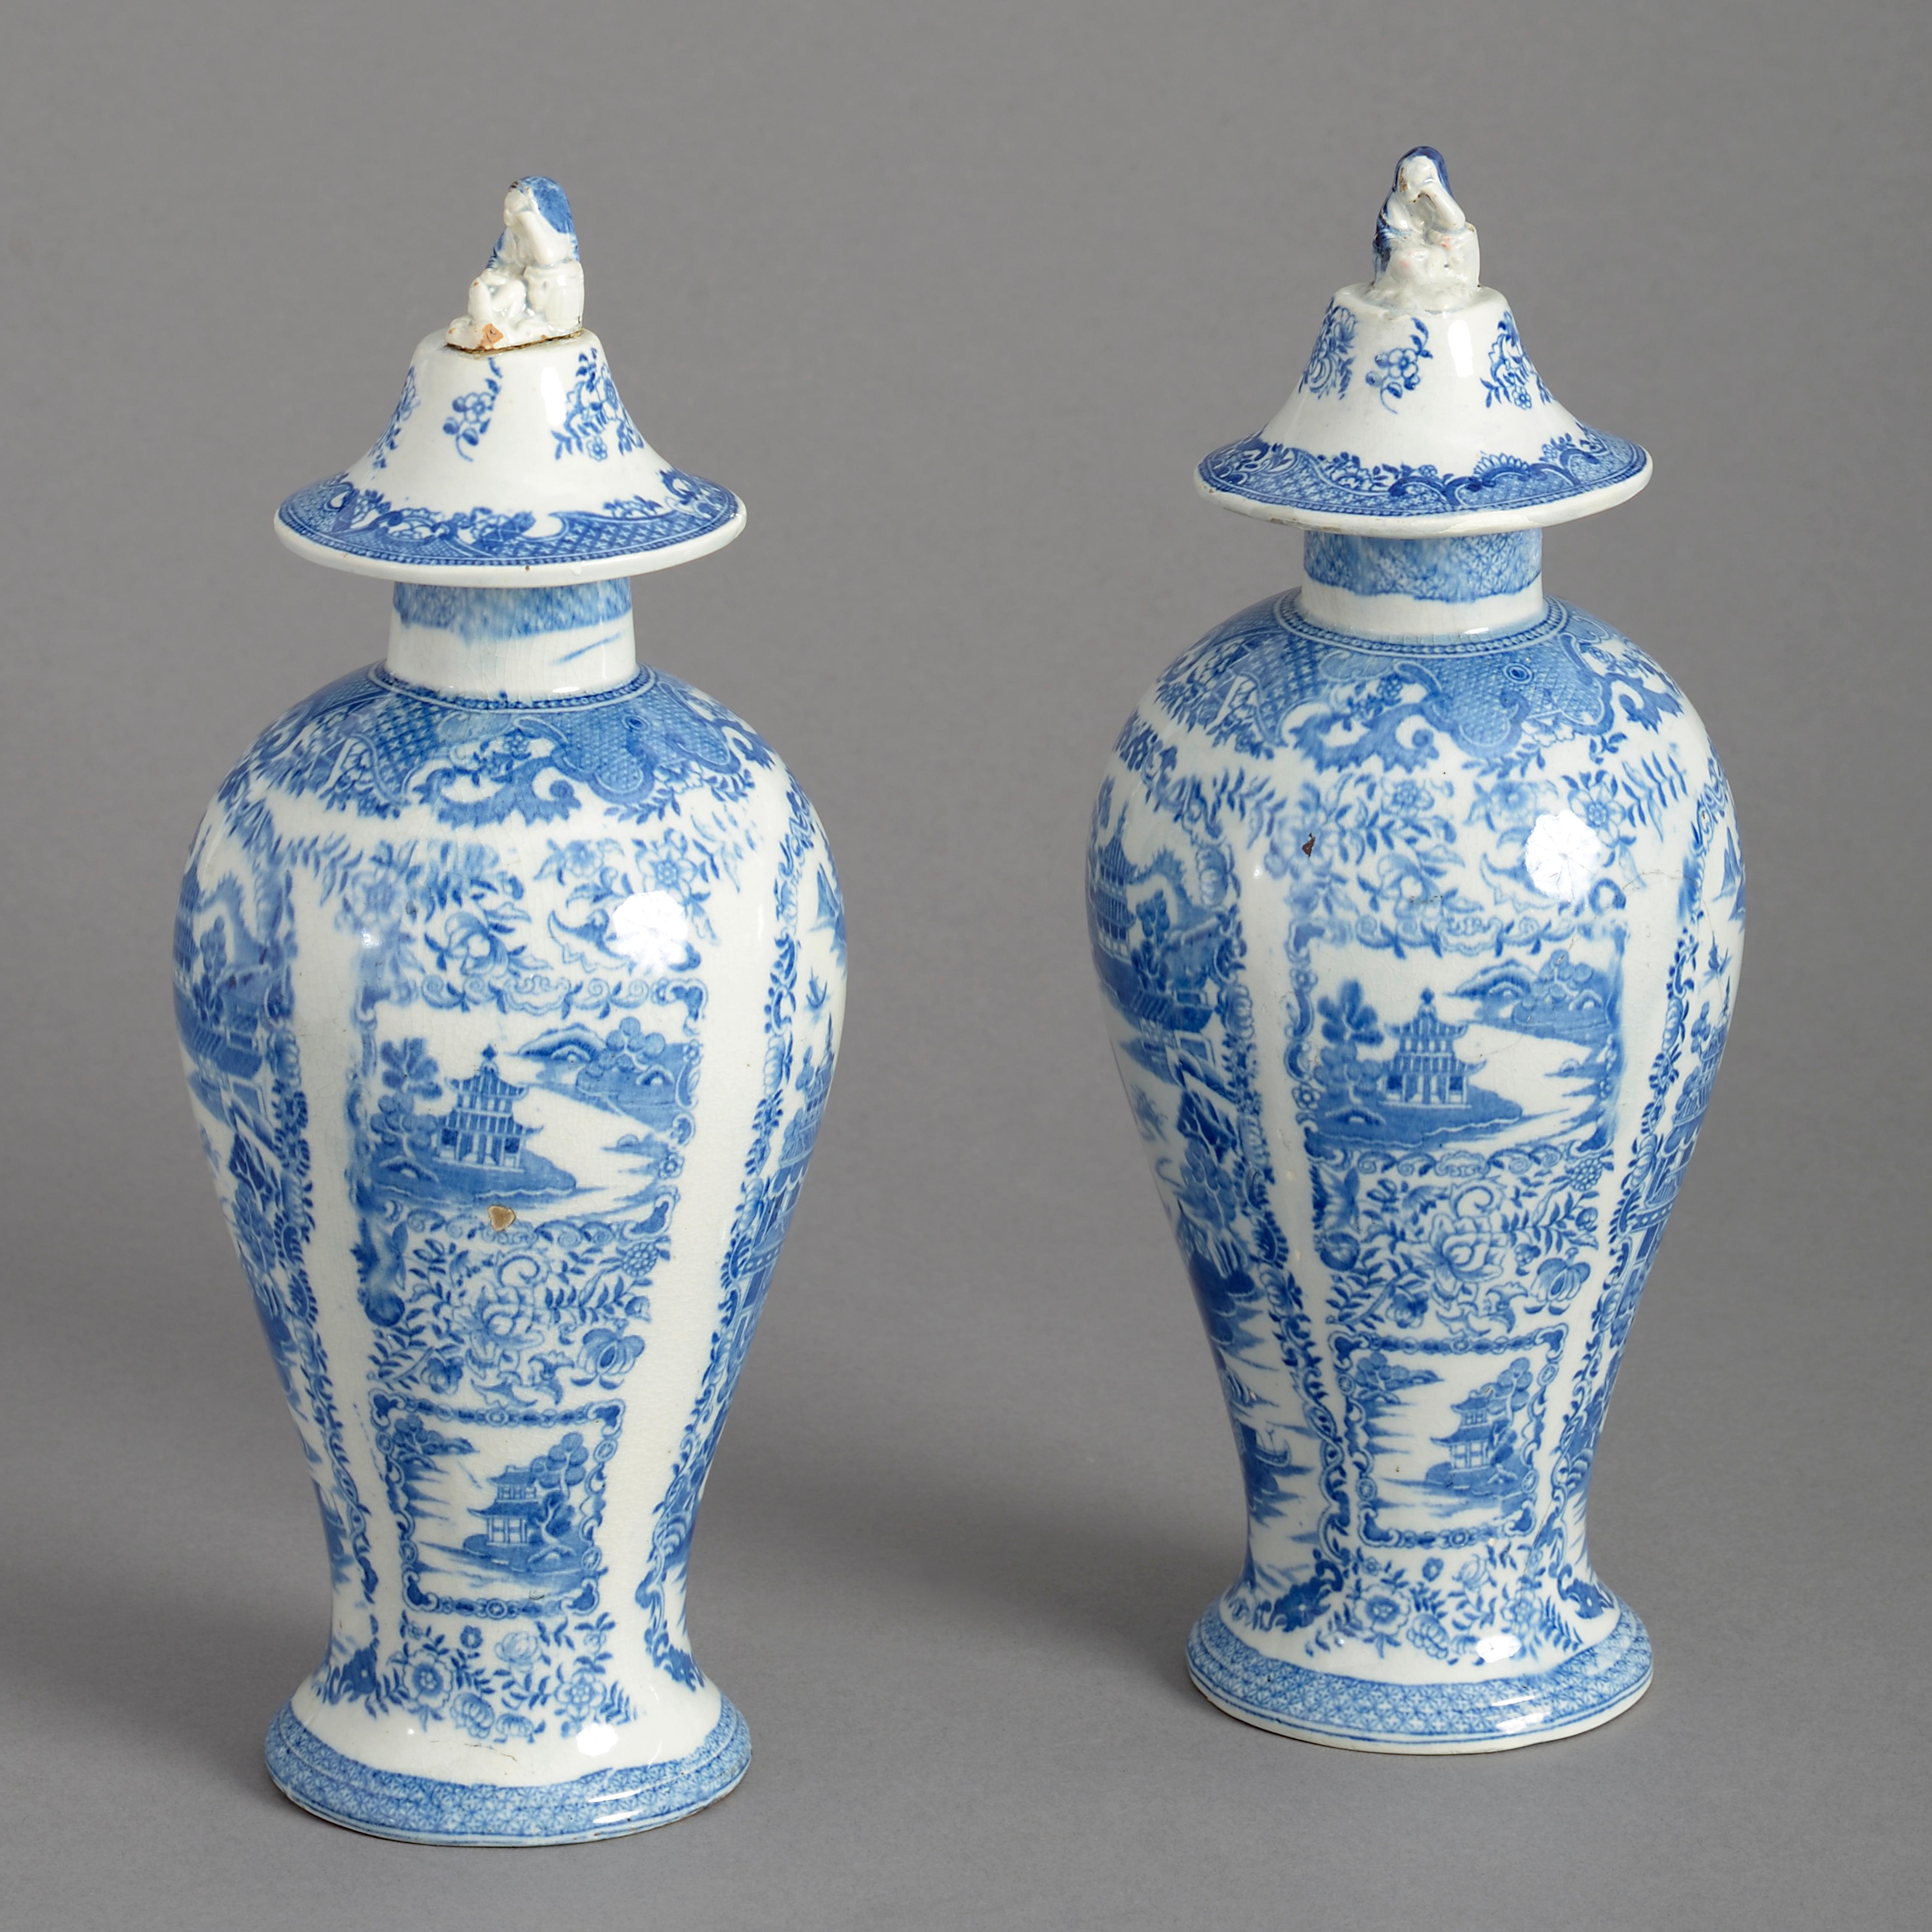 English Pair of 18th Century Blue and White Staffordshire Pottery Vases and Covers